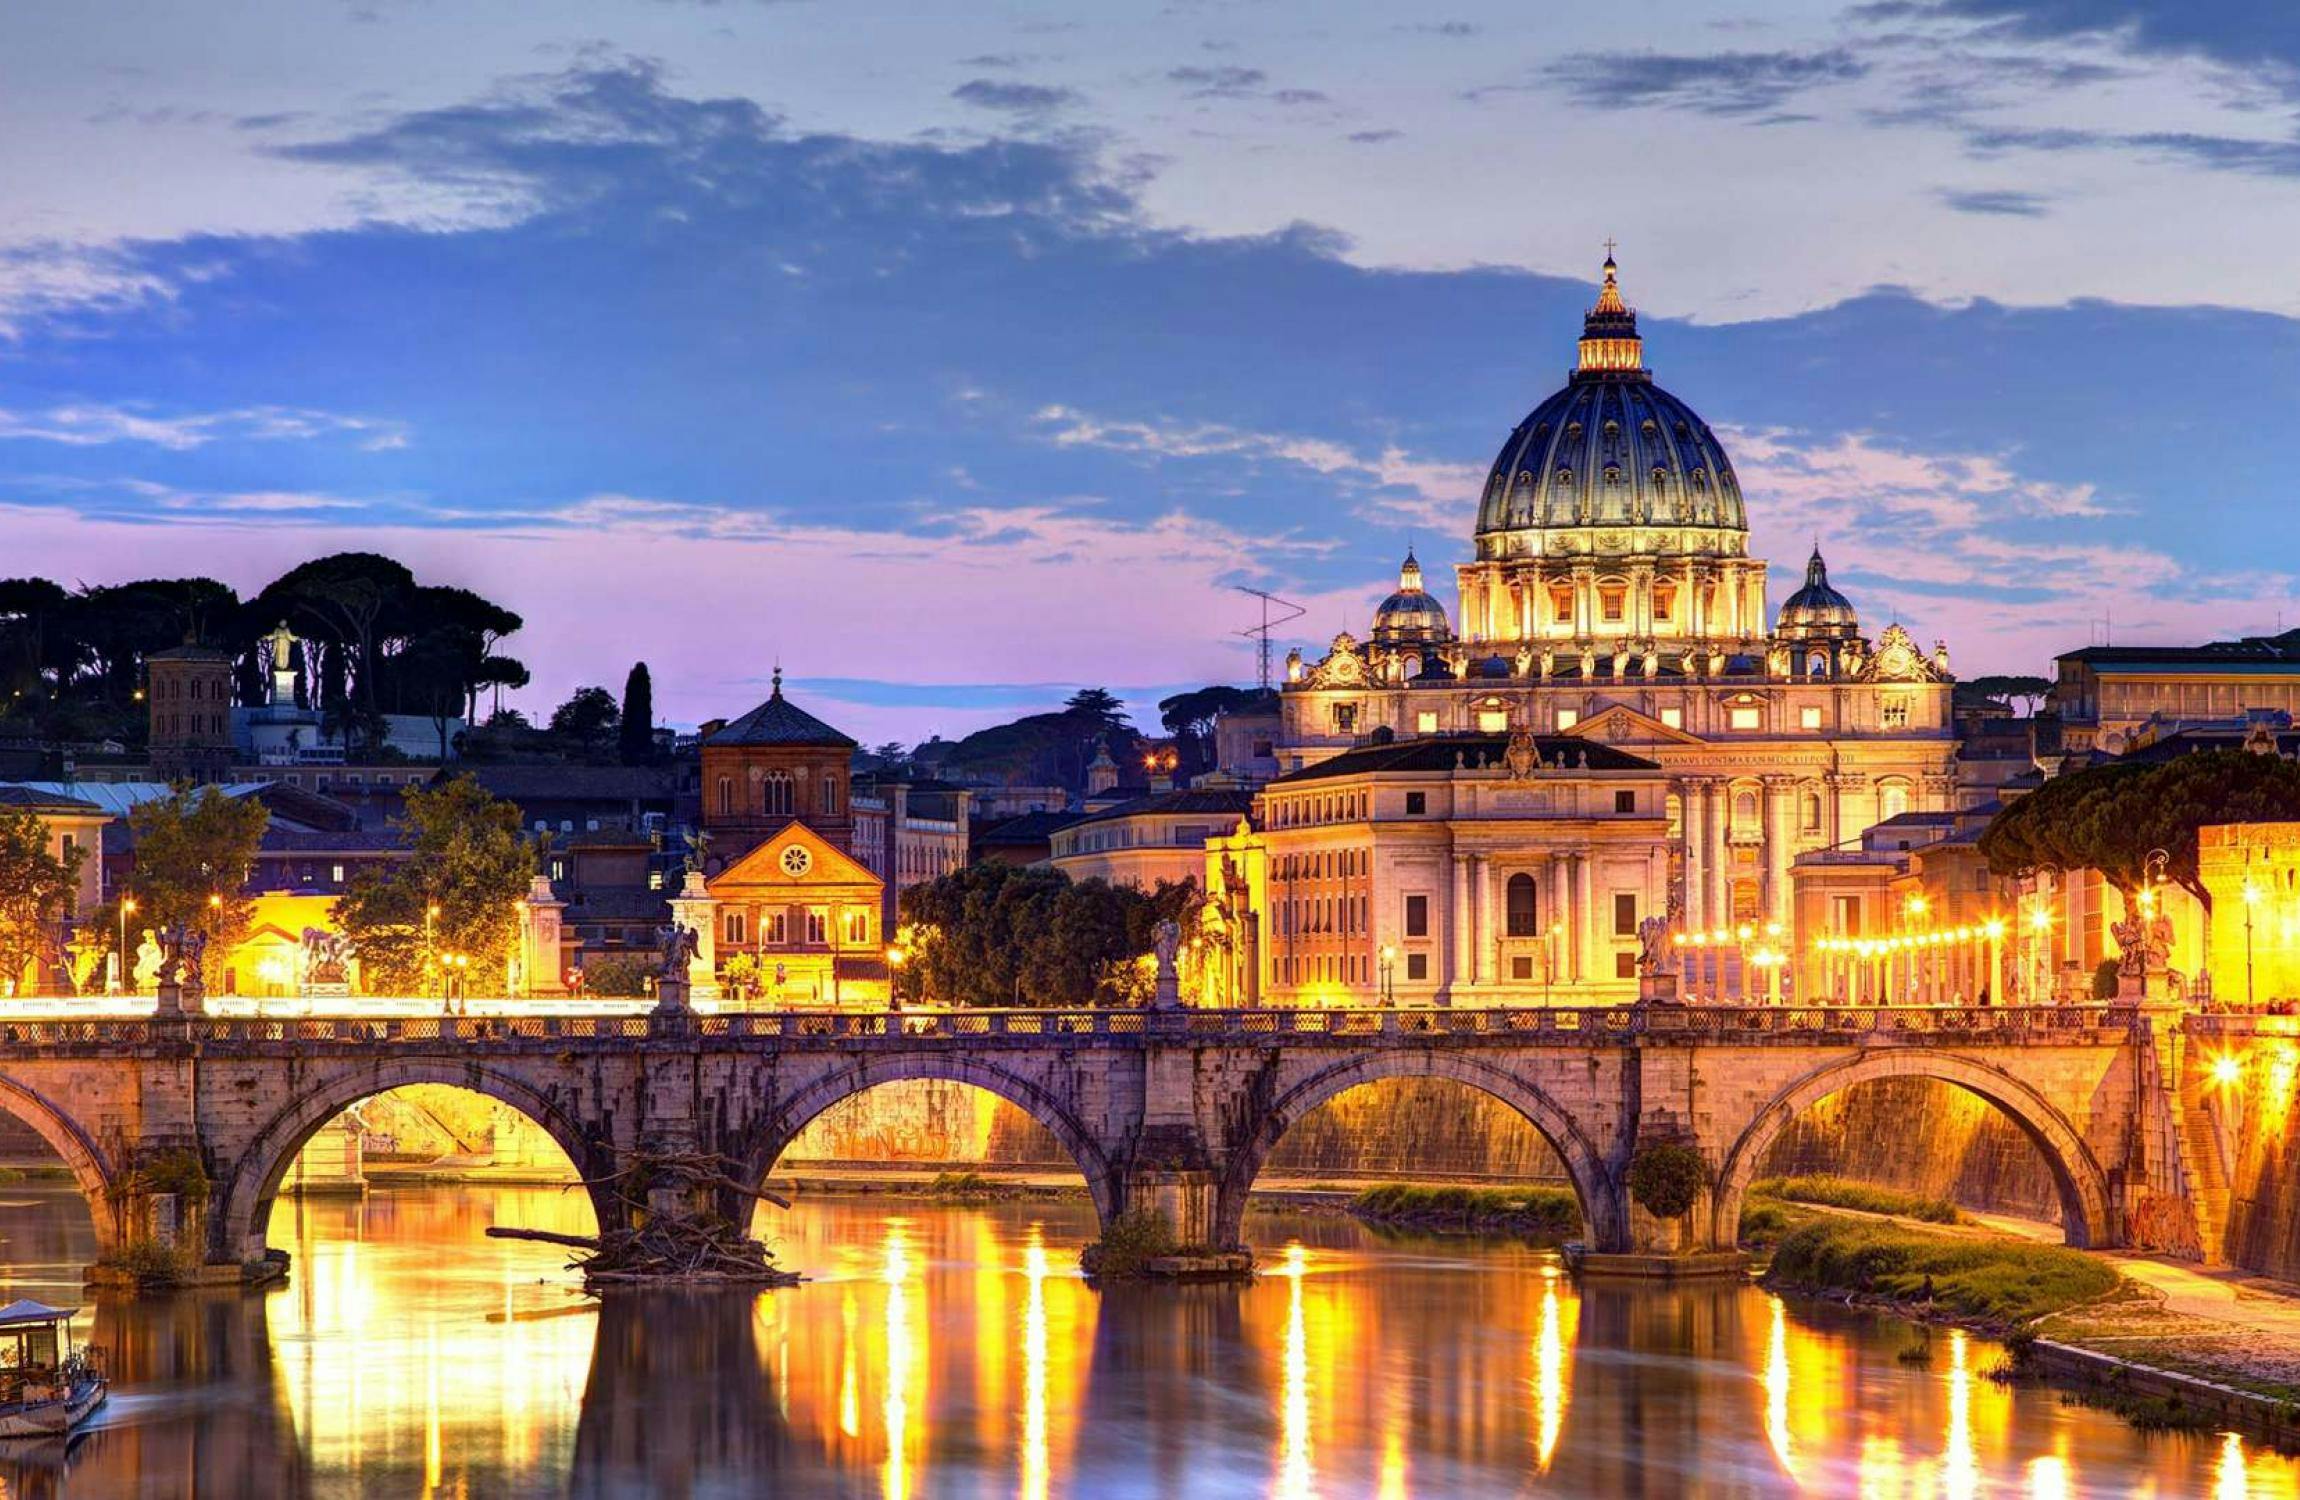 View of the city of Rome illuminated at sunset